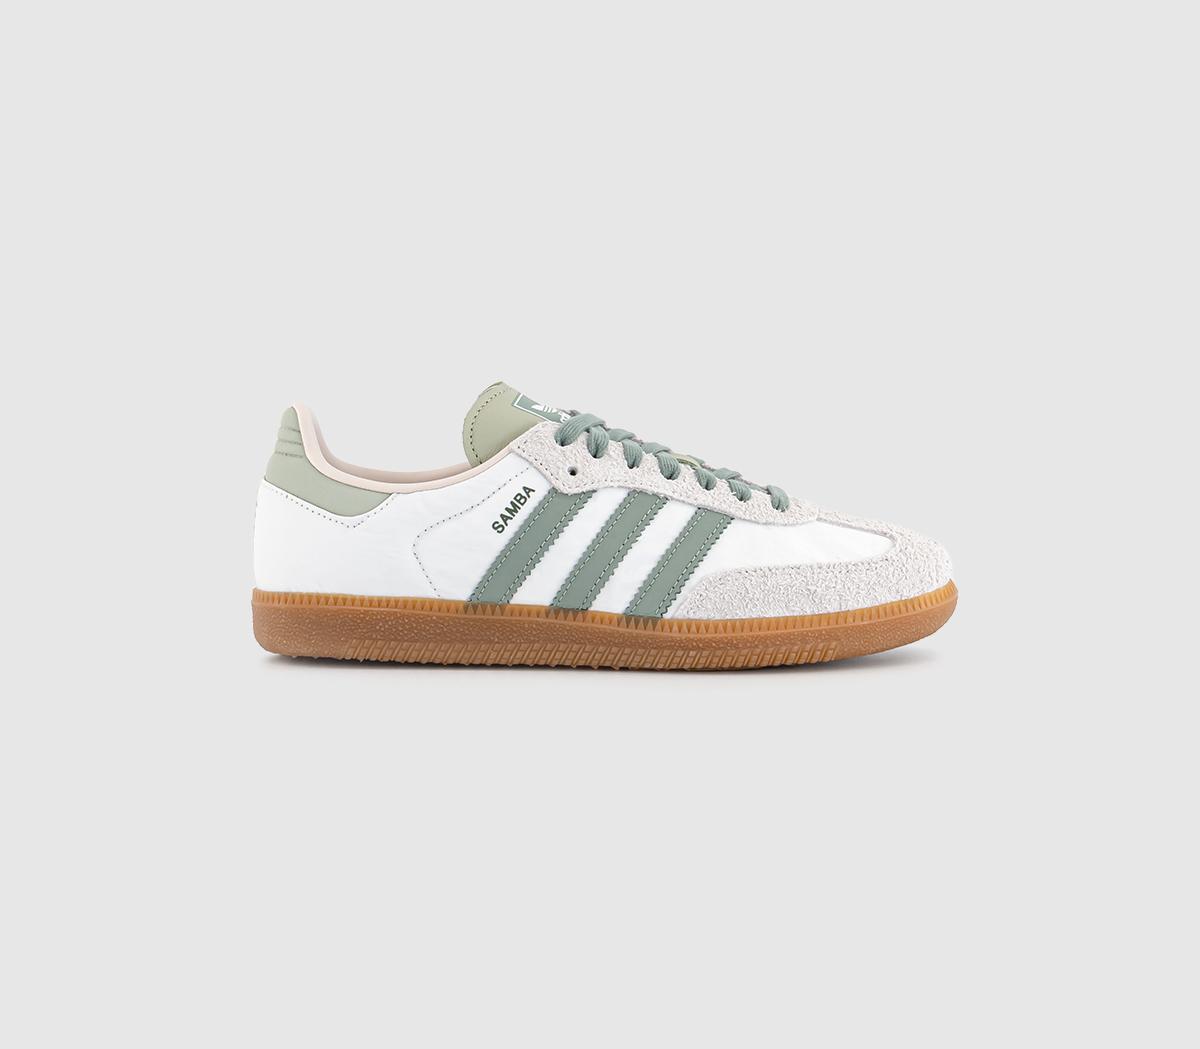 adidas Samba OG Trainers White Silver Green Putty Mauve - Men's Trainers